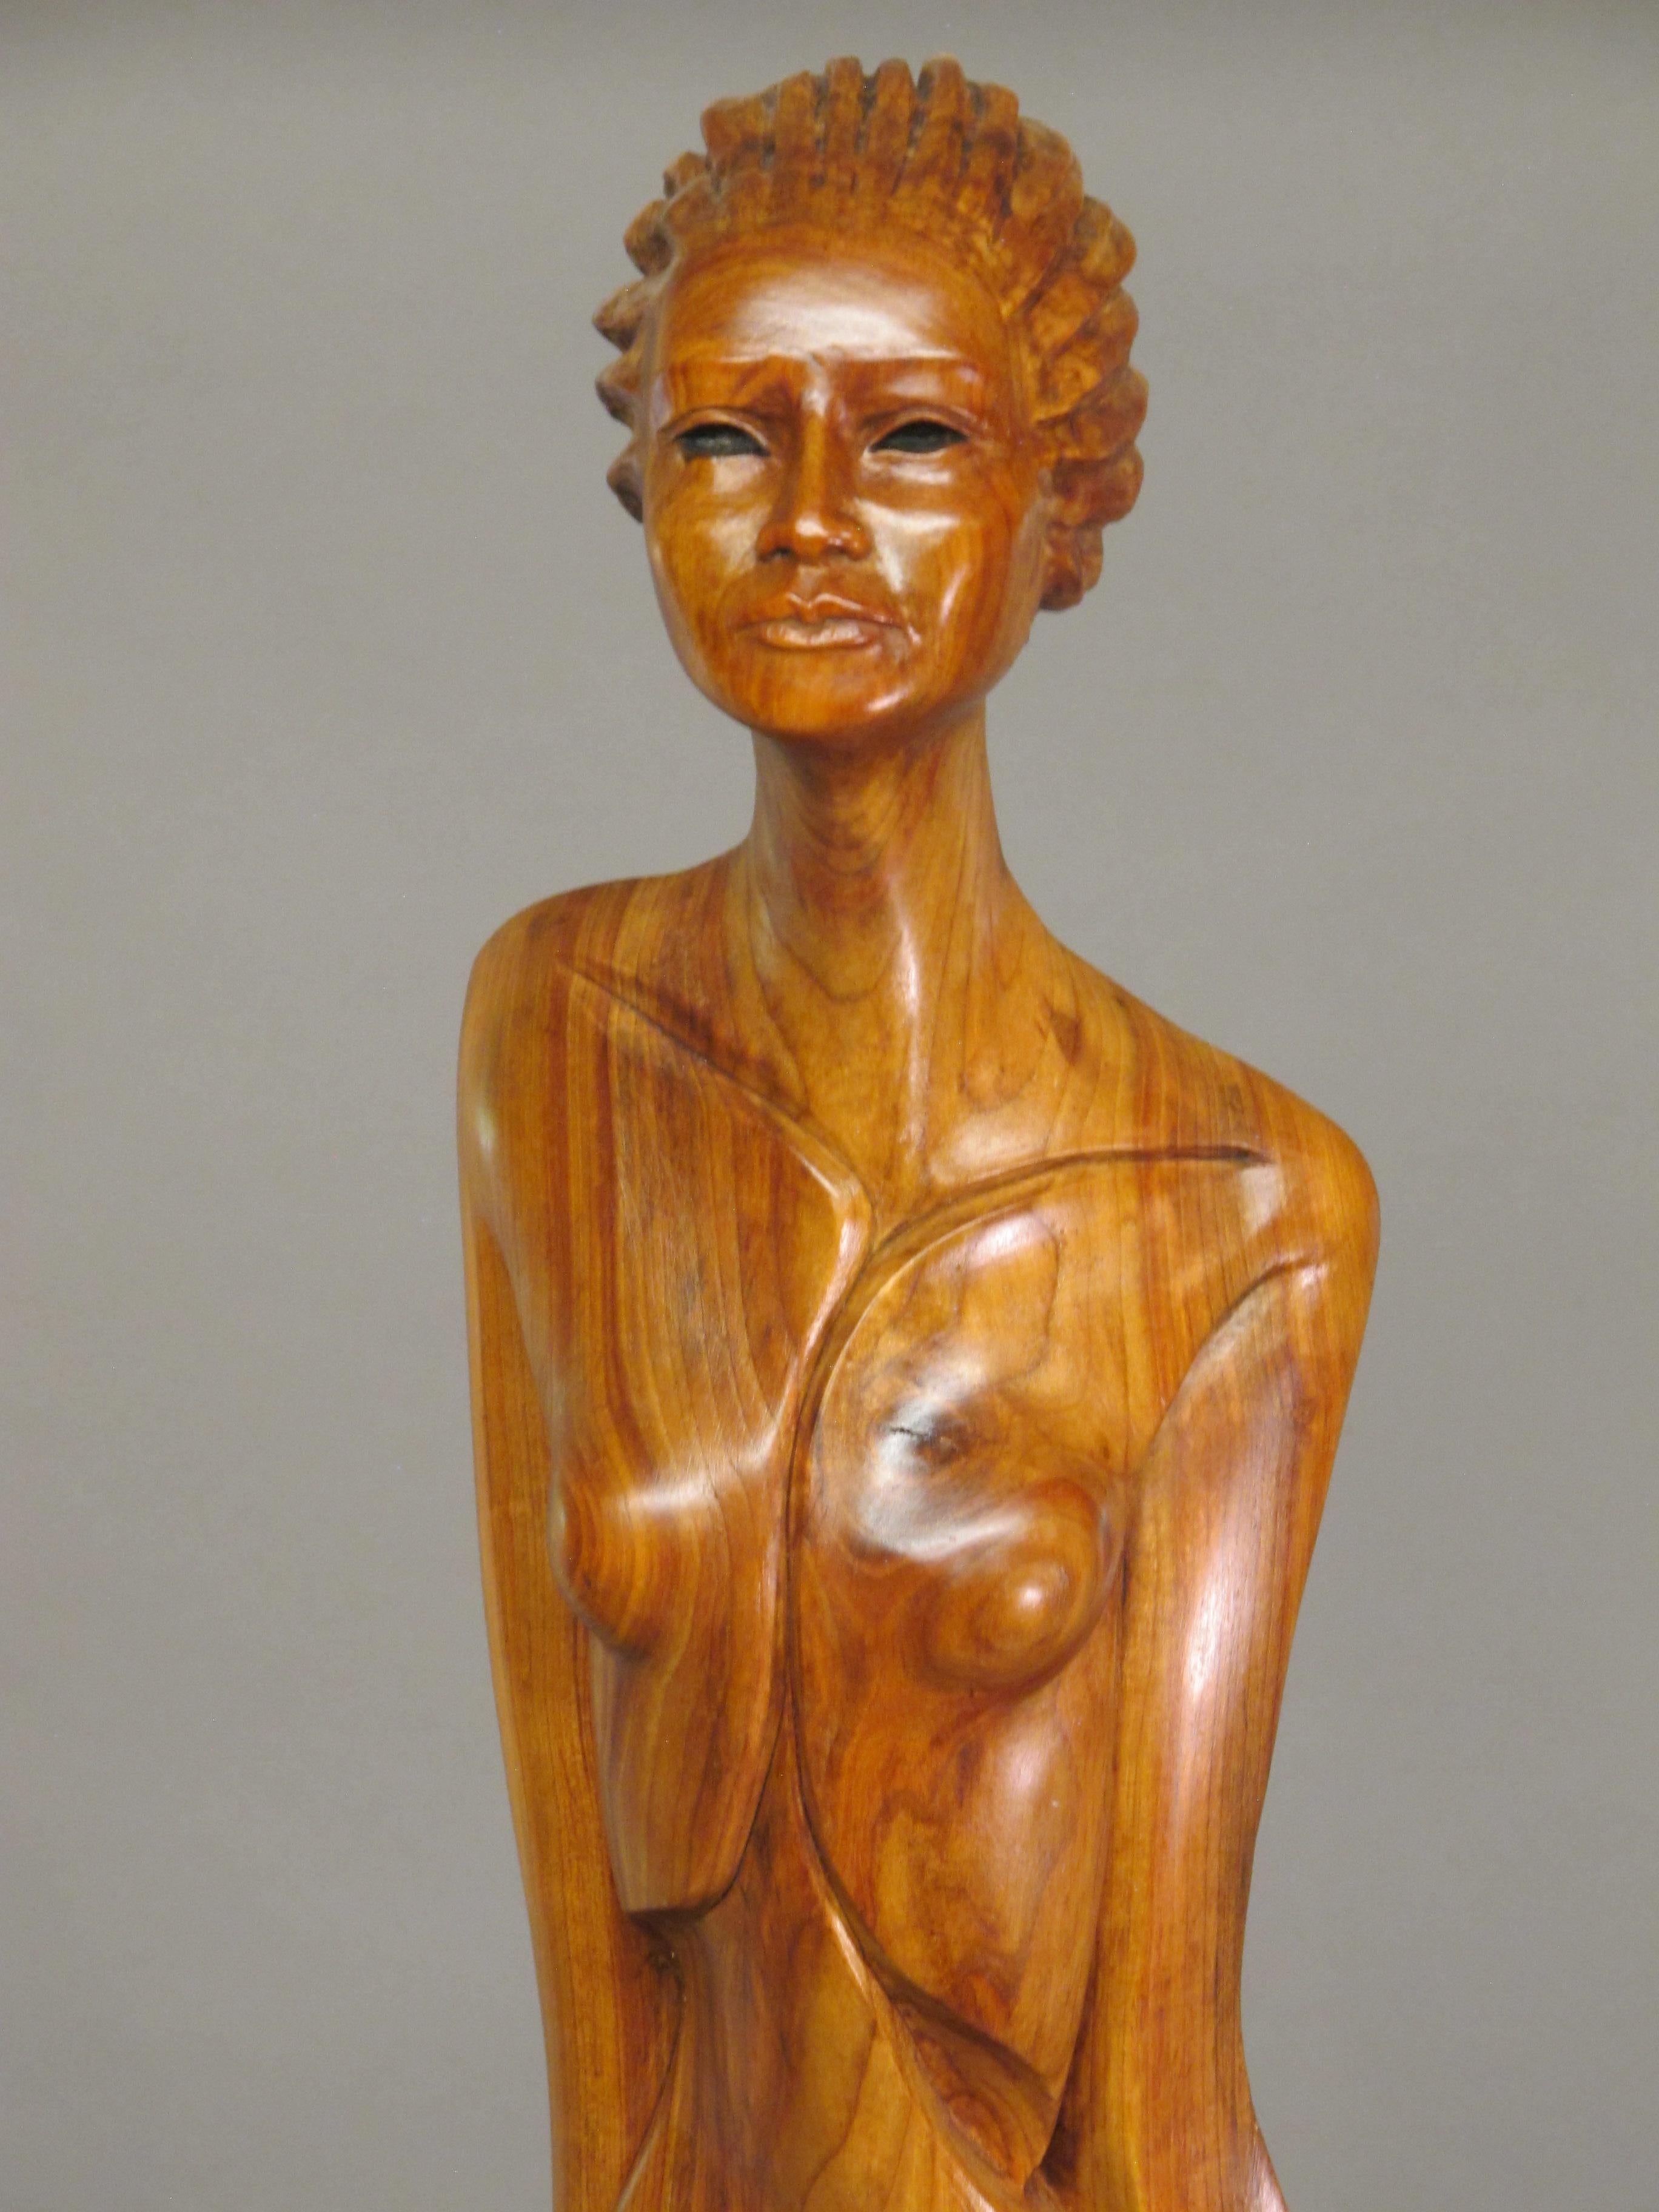 Troy Williams Figurative Sculpture - Places In The Heart, Nut wood sculpture on steel base, female nude, brown